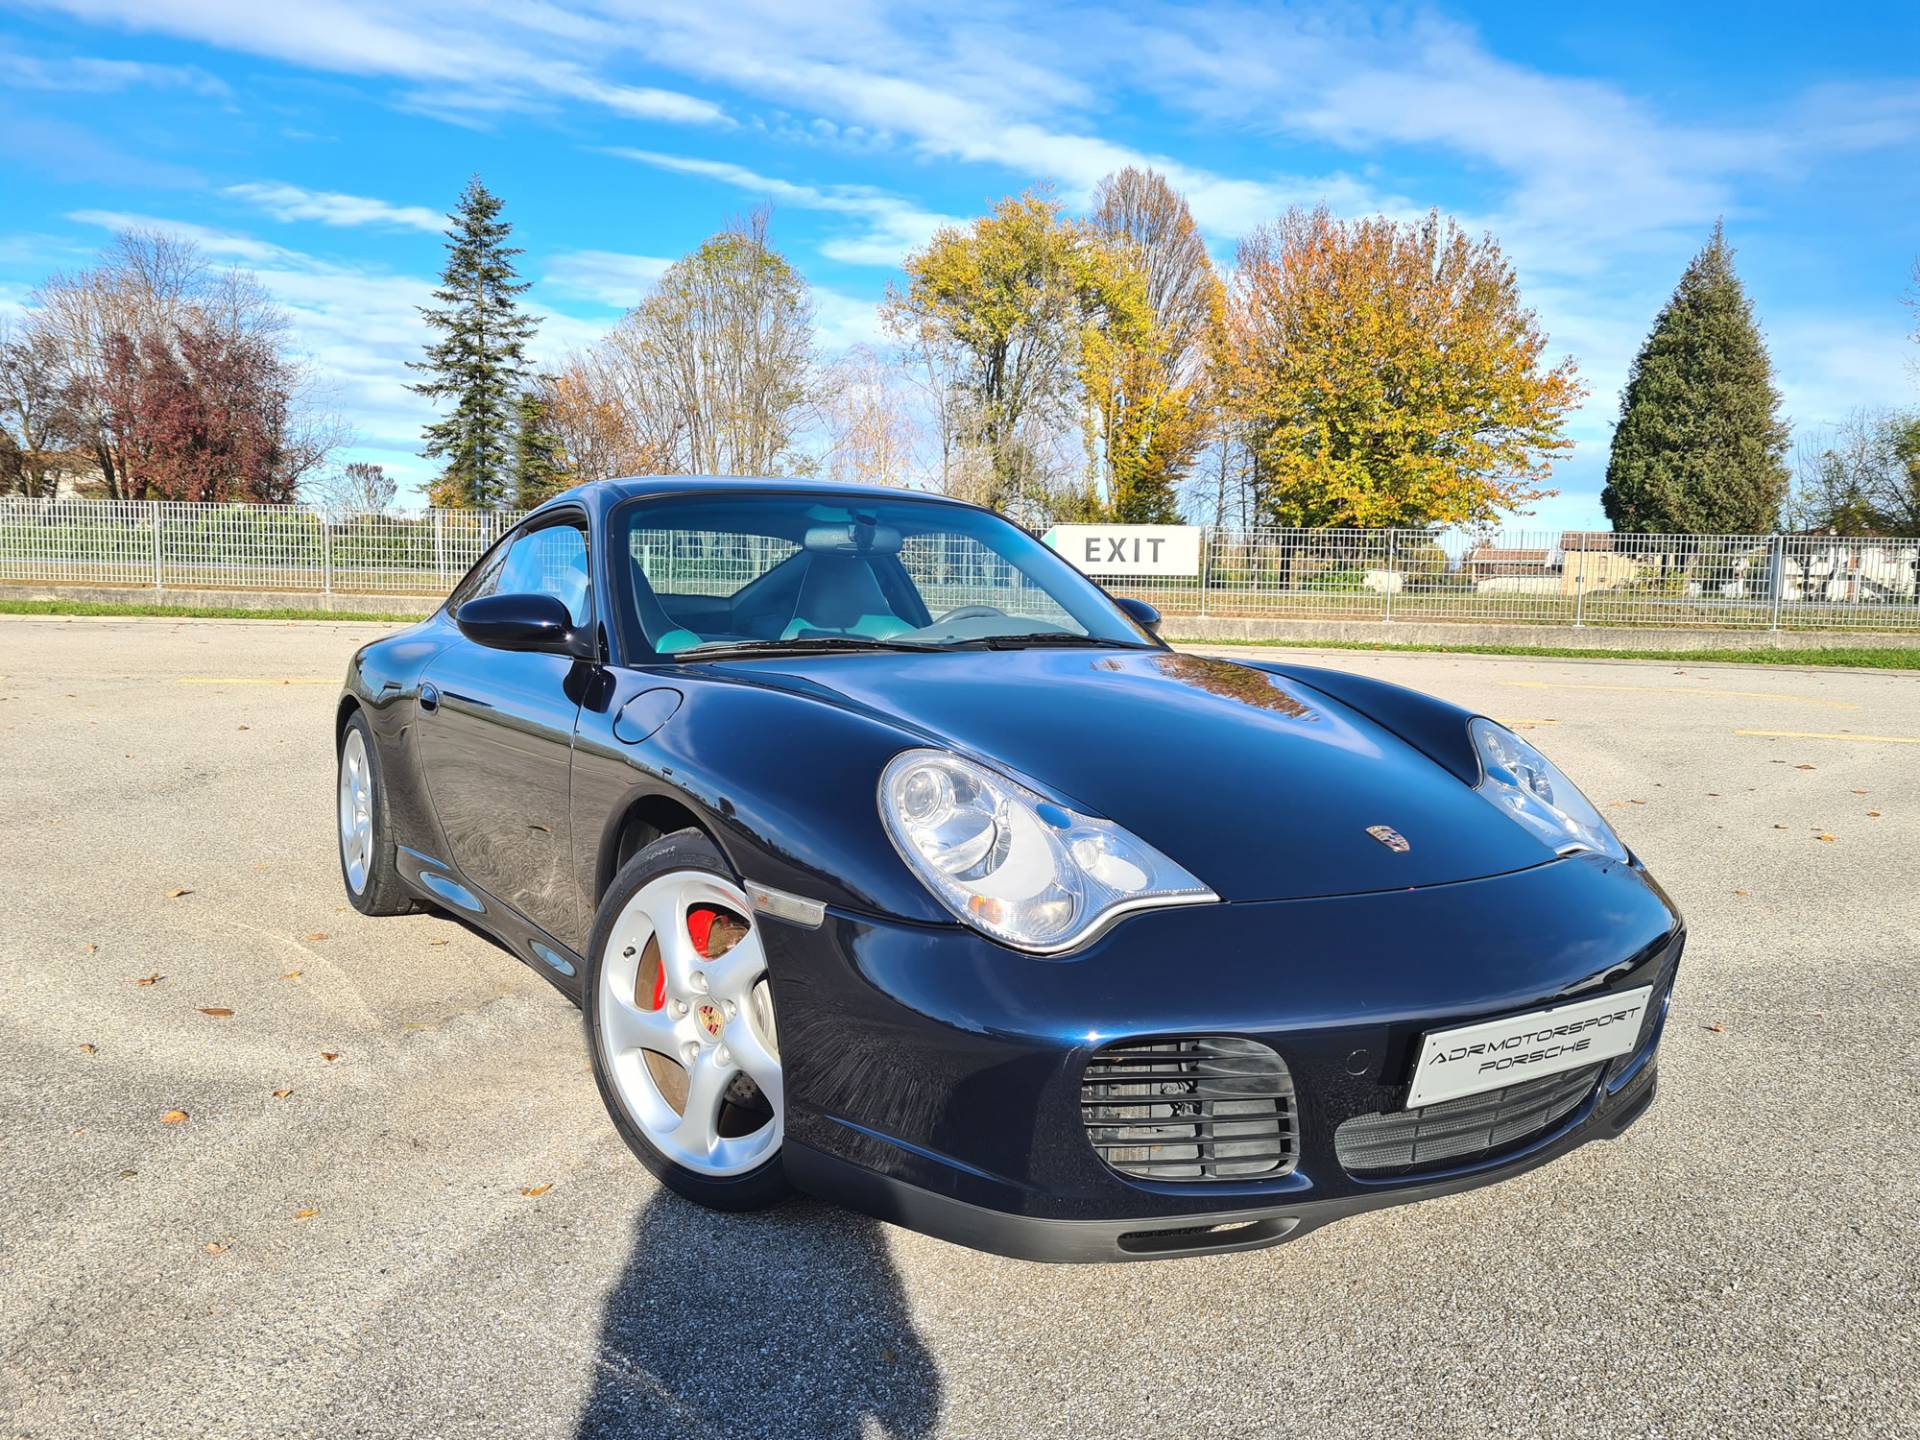 For Sale: Porsche 911 Carrera 4S (2002) offered for GBP 53,372